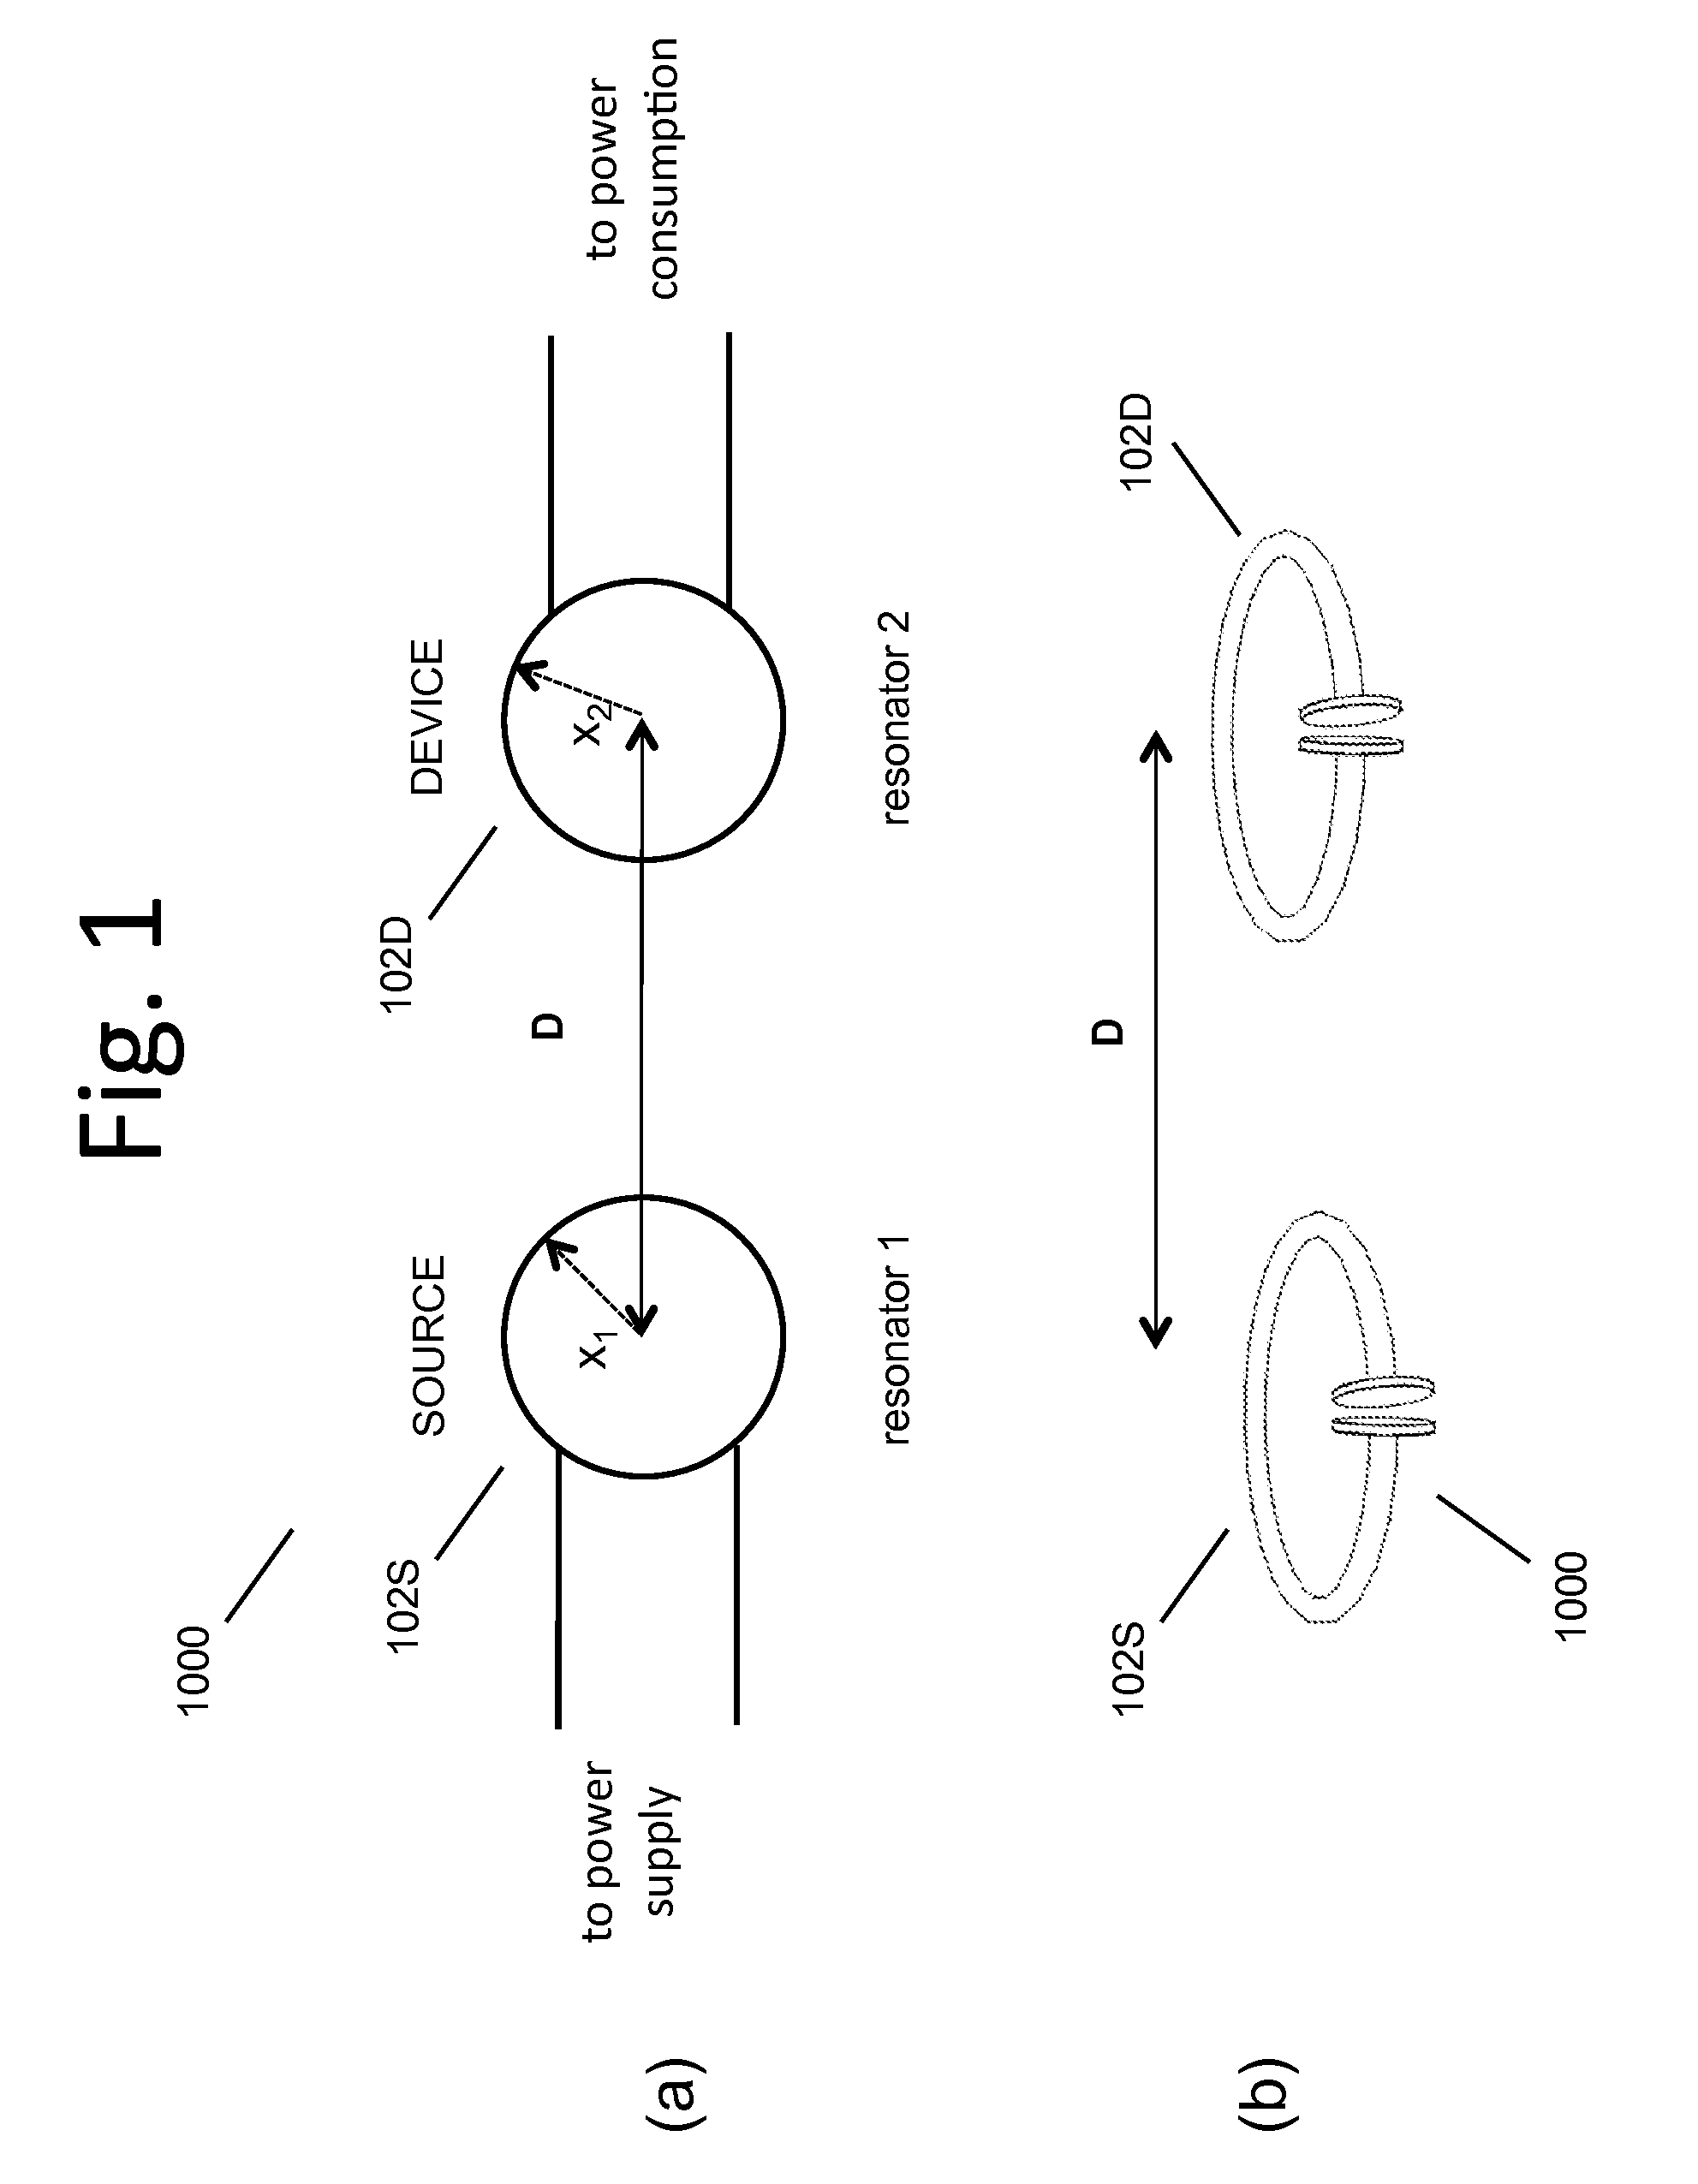 Wireless energy transfer using object positioning for low loss